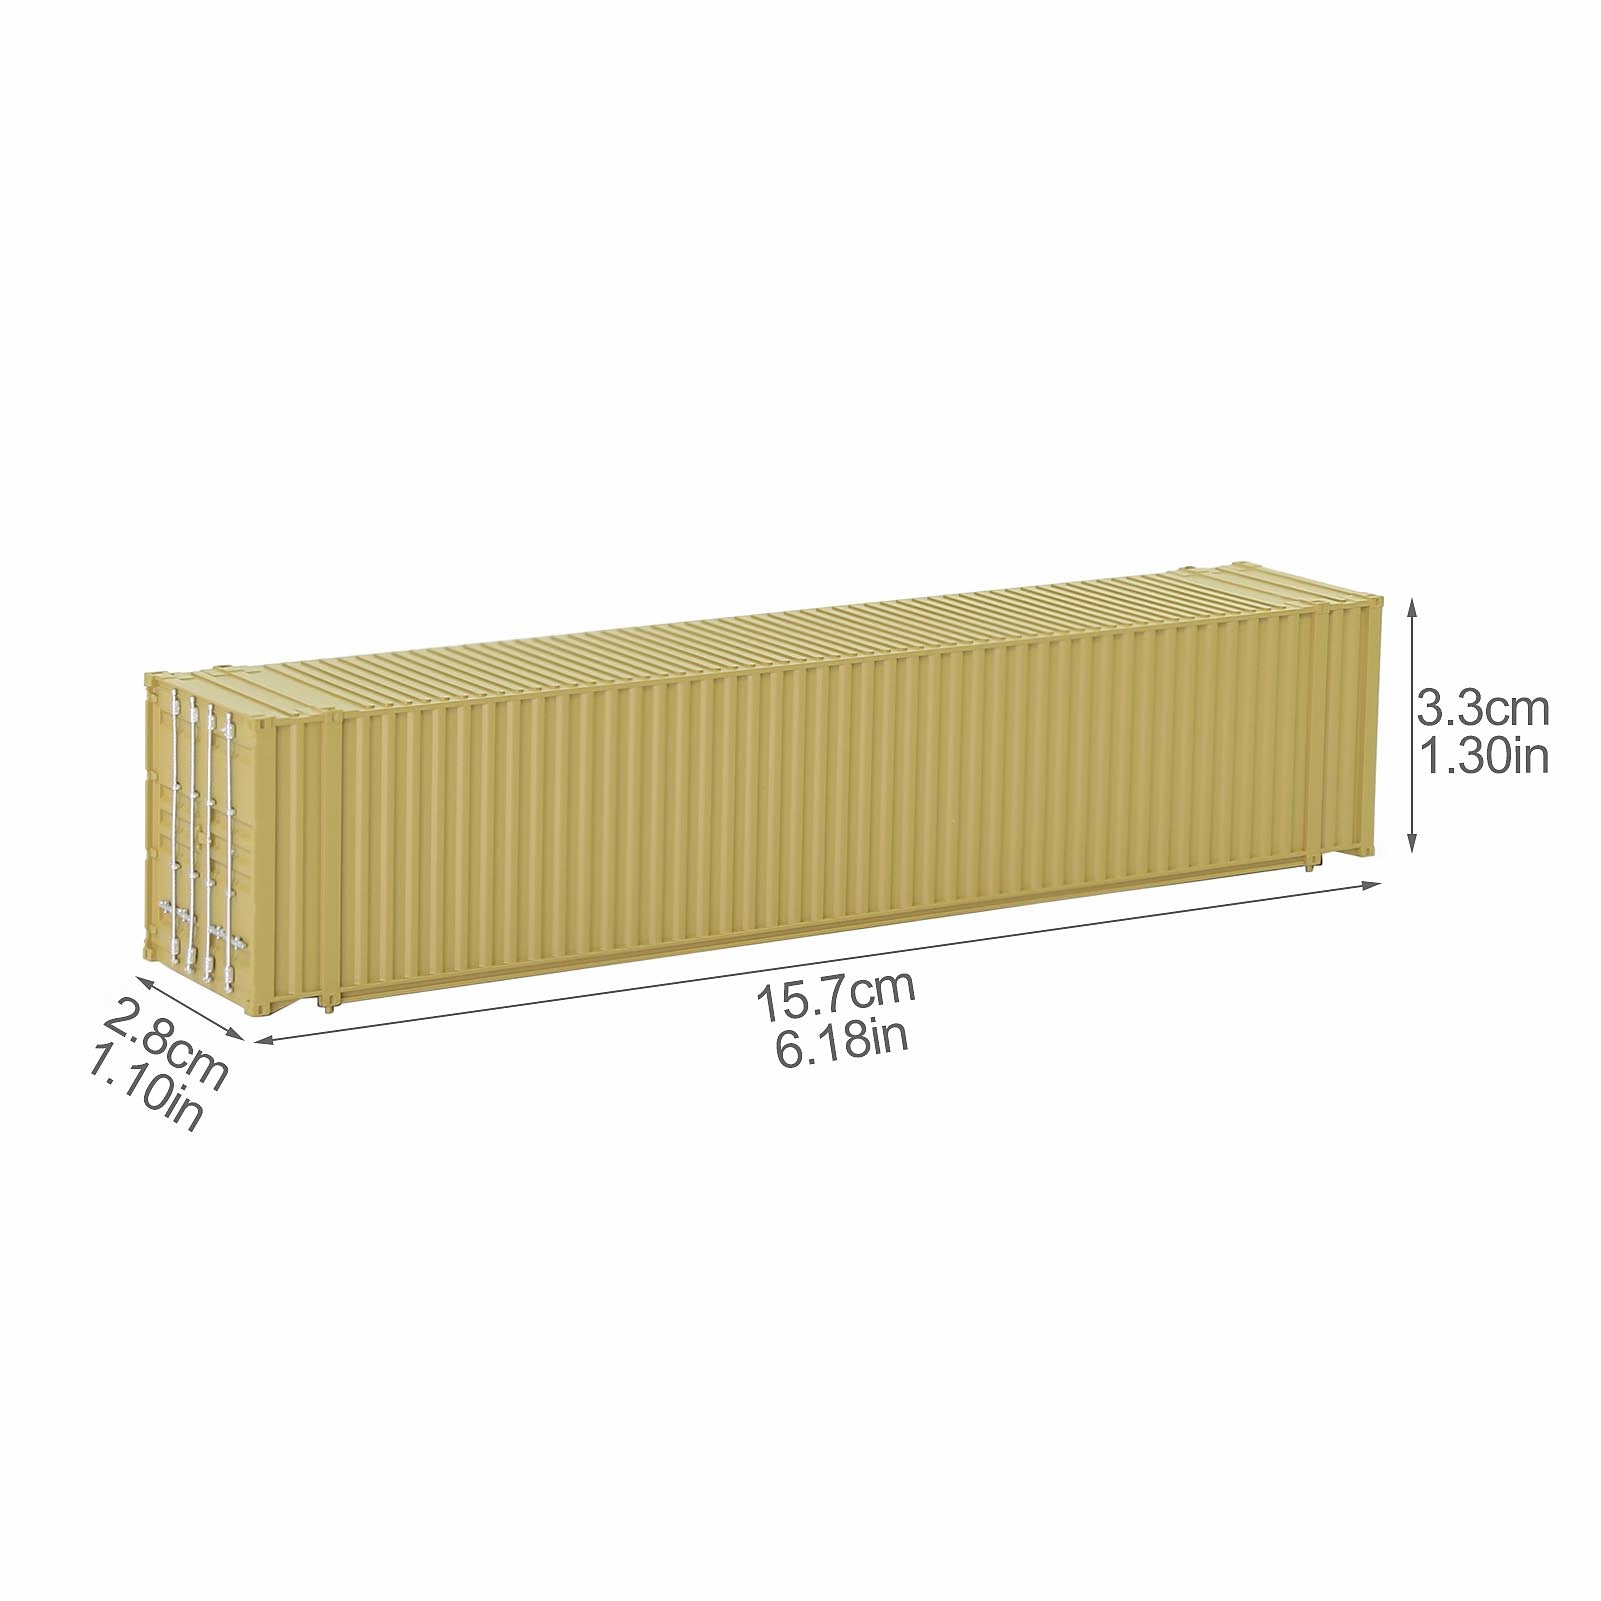 C8745 9pcs HO Scale 1:87 45ft Pure Color Shipping Containers